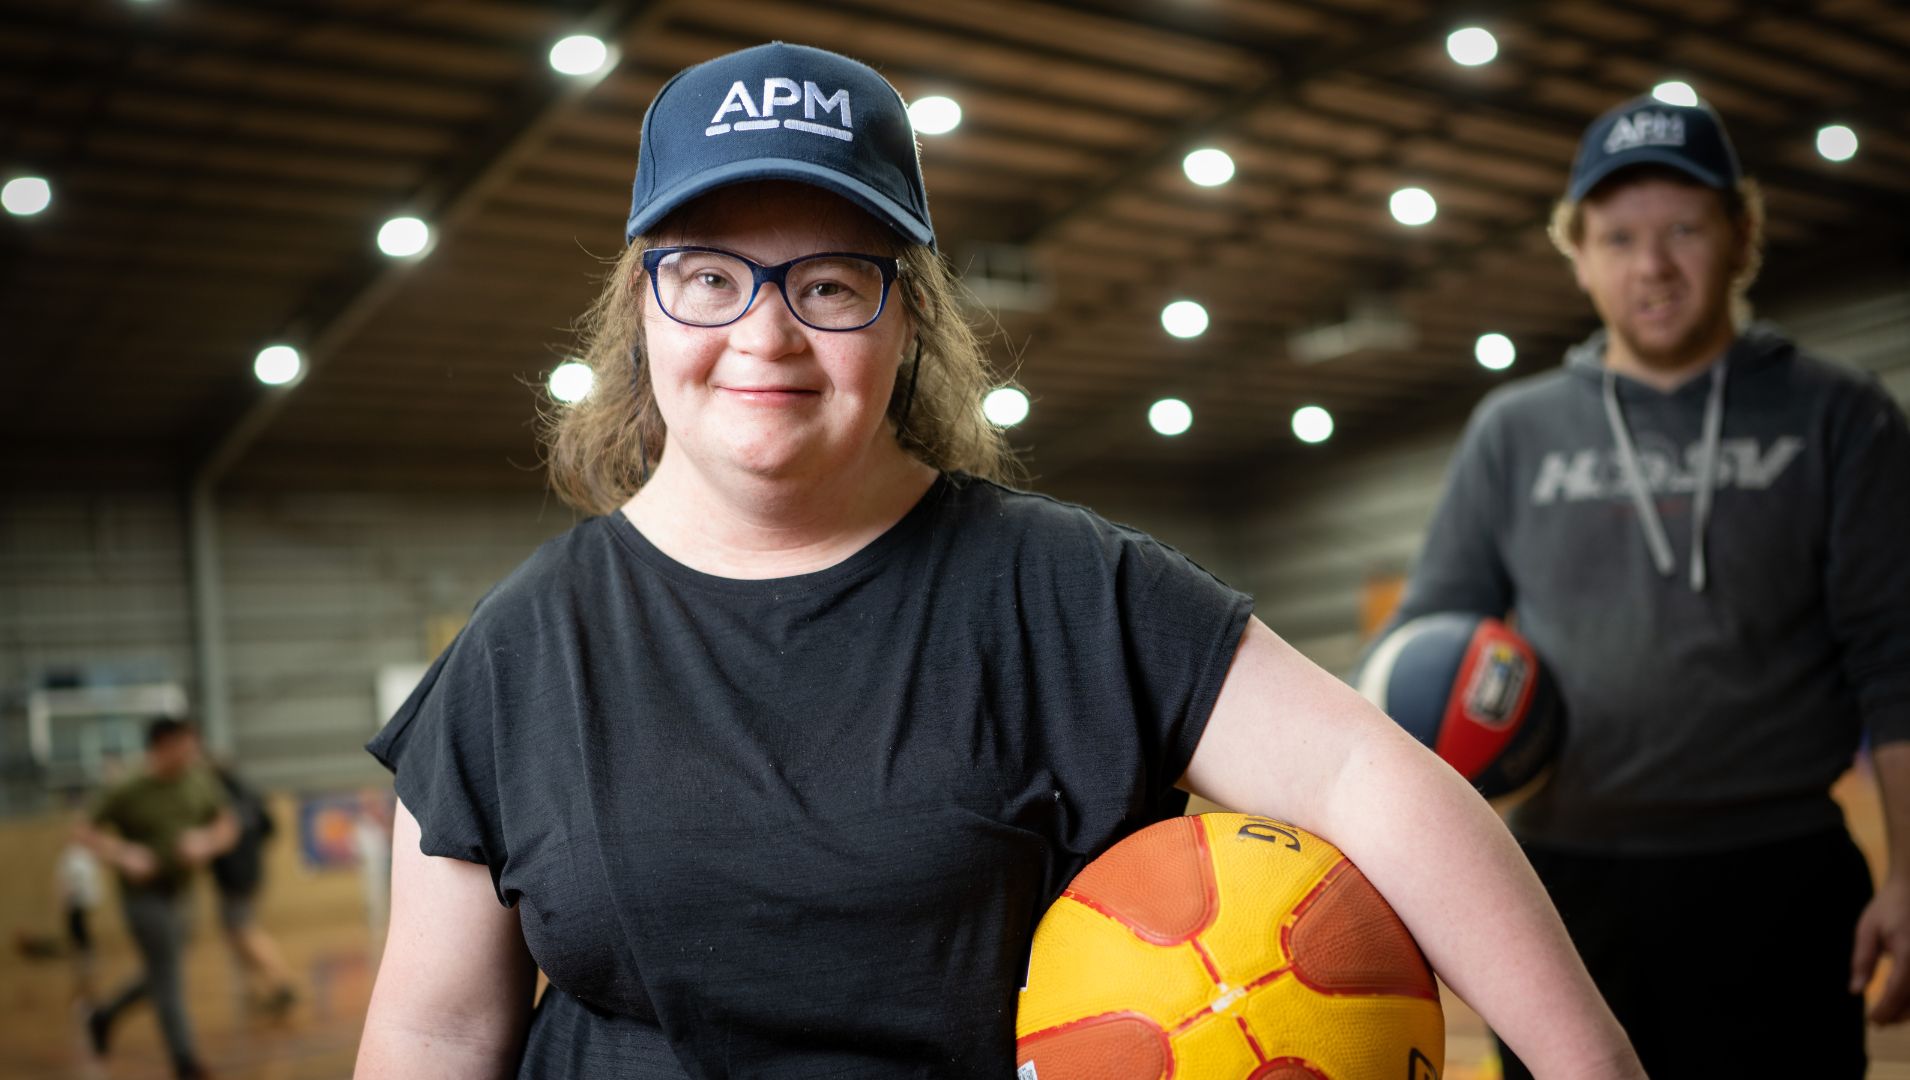 Holly smiling with a basketball and APM cap